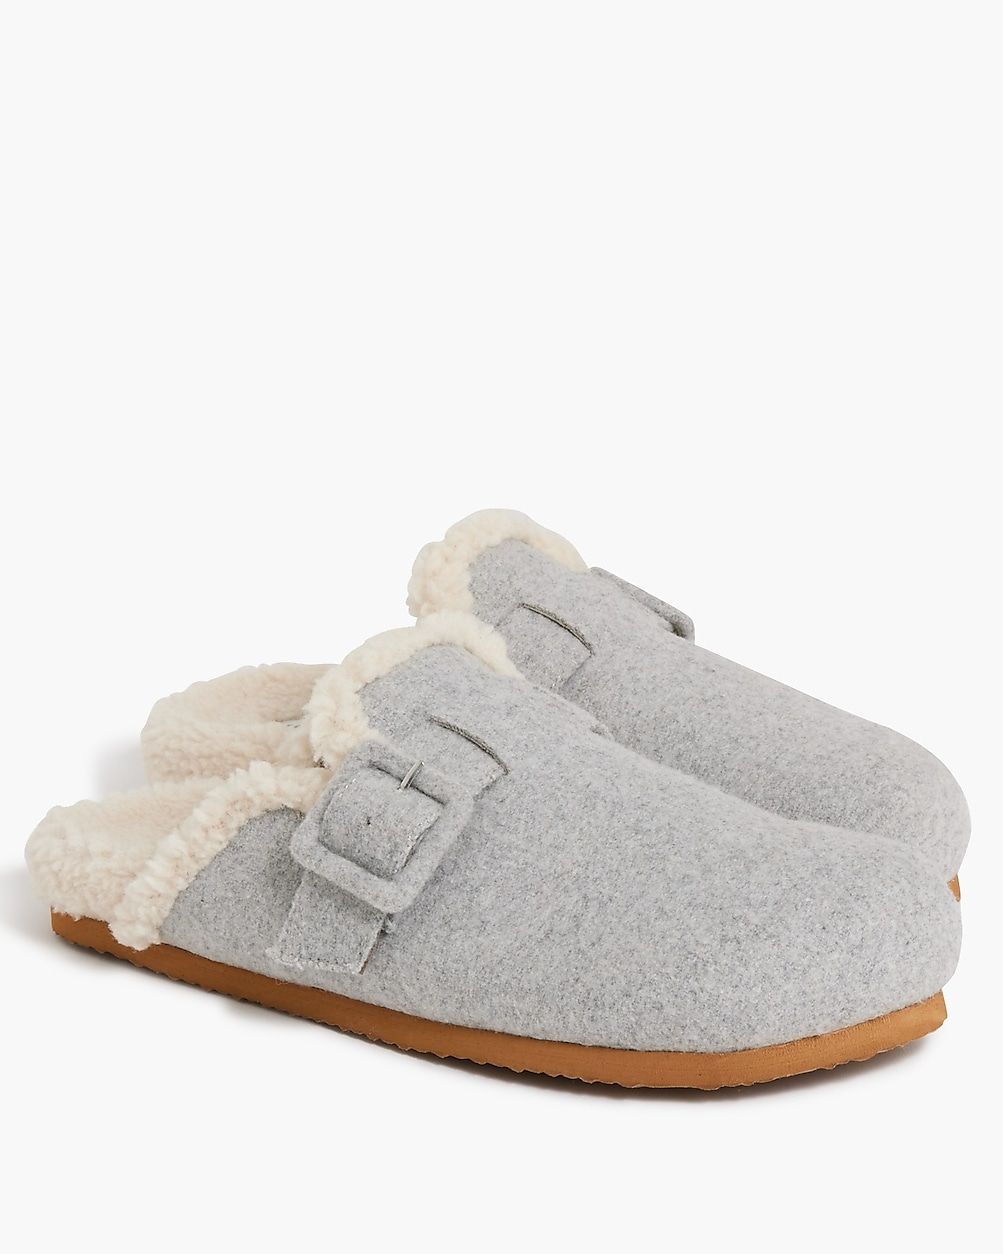 Sherpa-lined clog slippers | J.Crew Factory